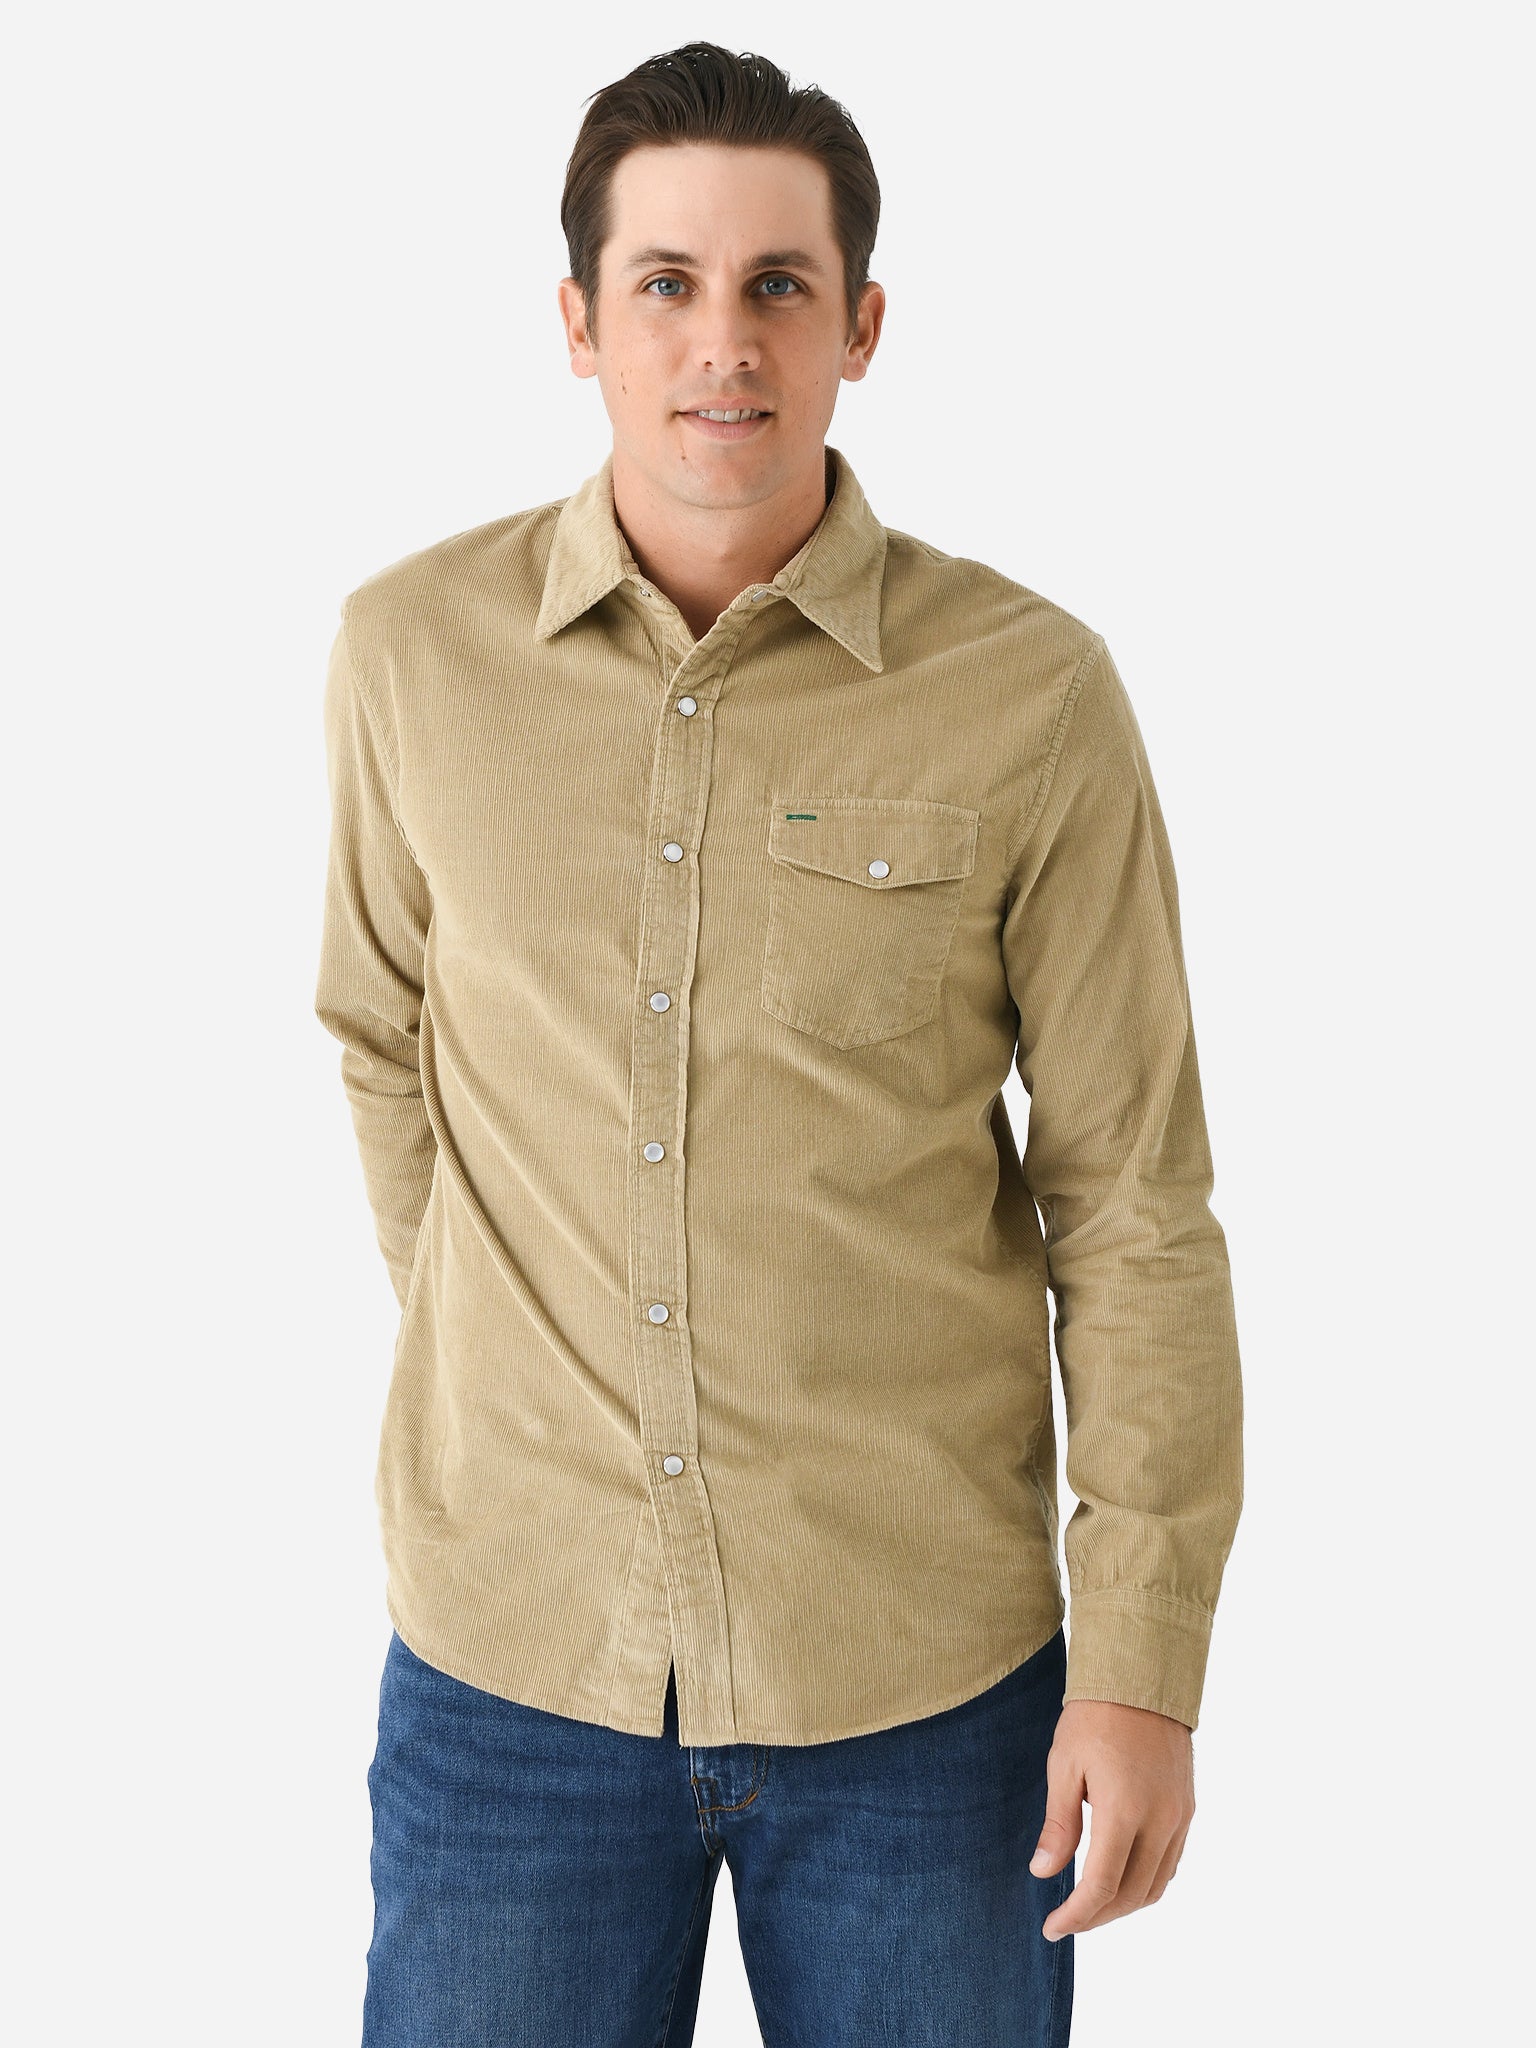 Corduroy Pearl Snap | Sand | Size: S at Criquet